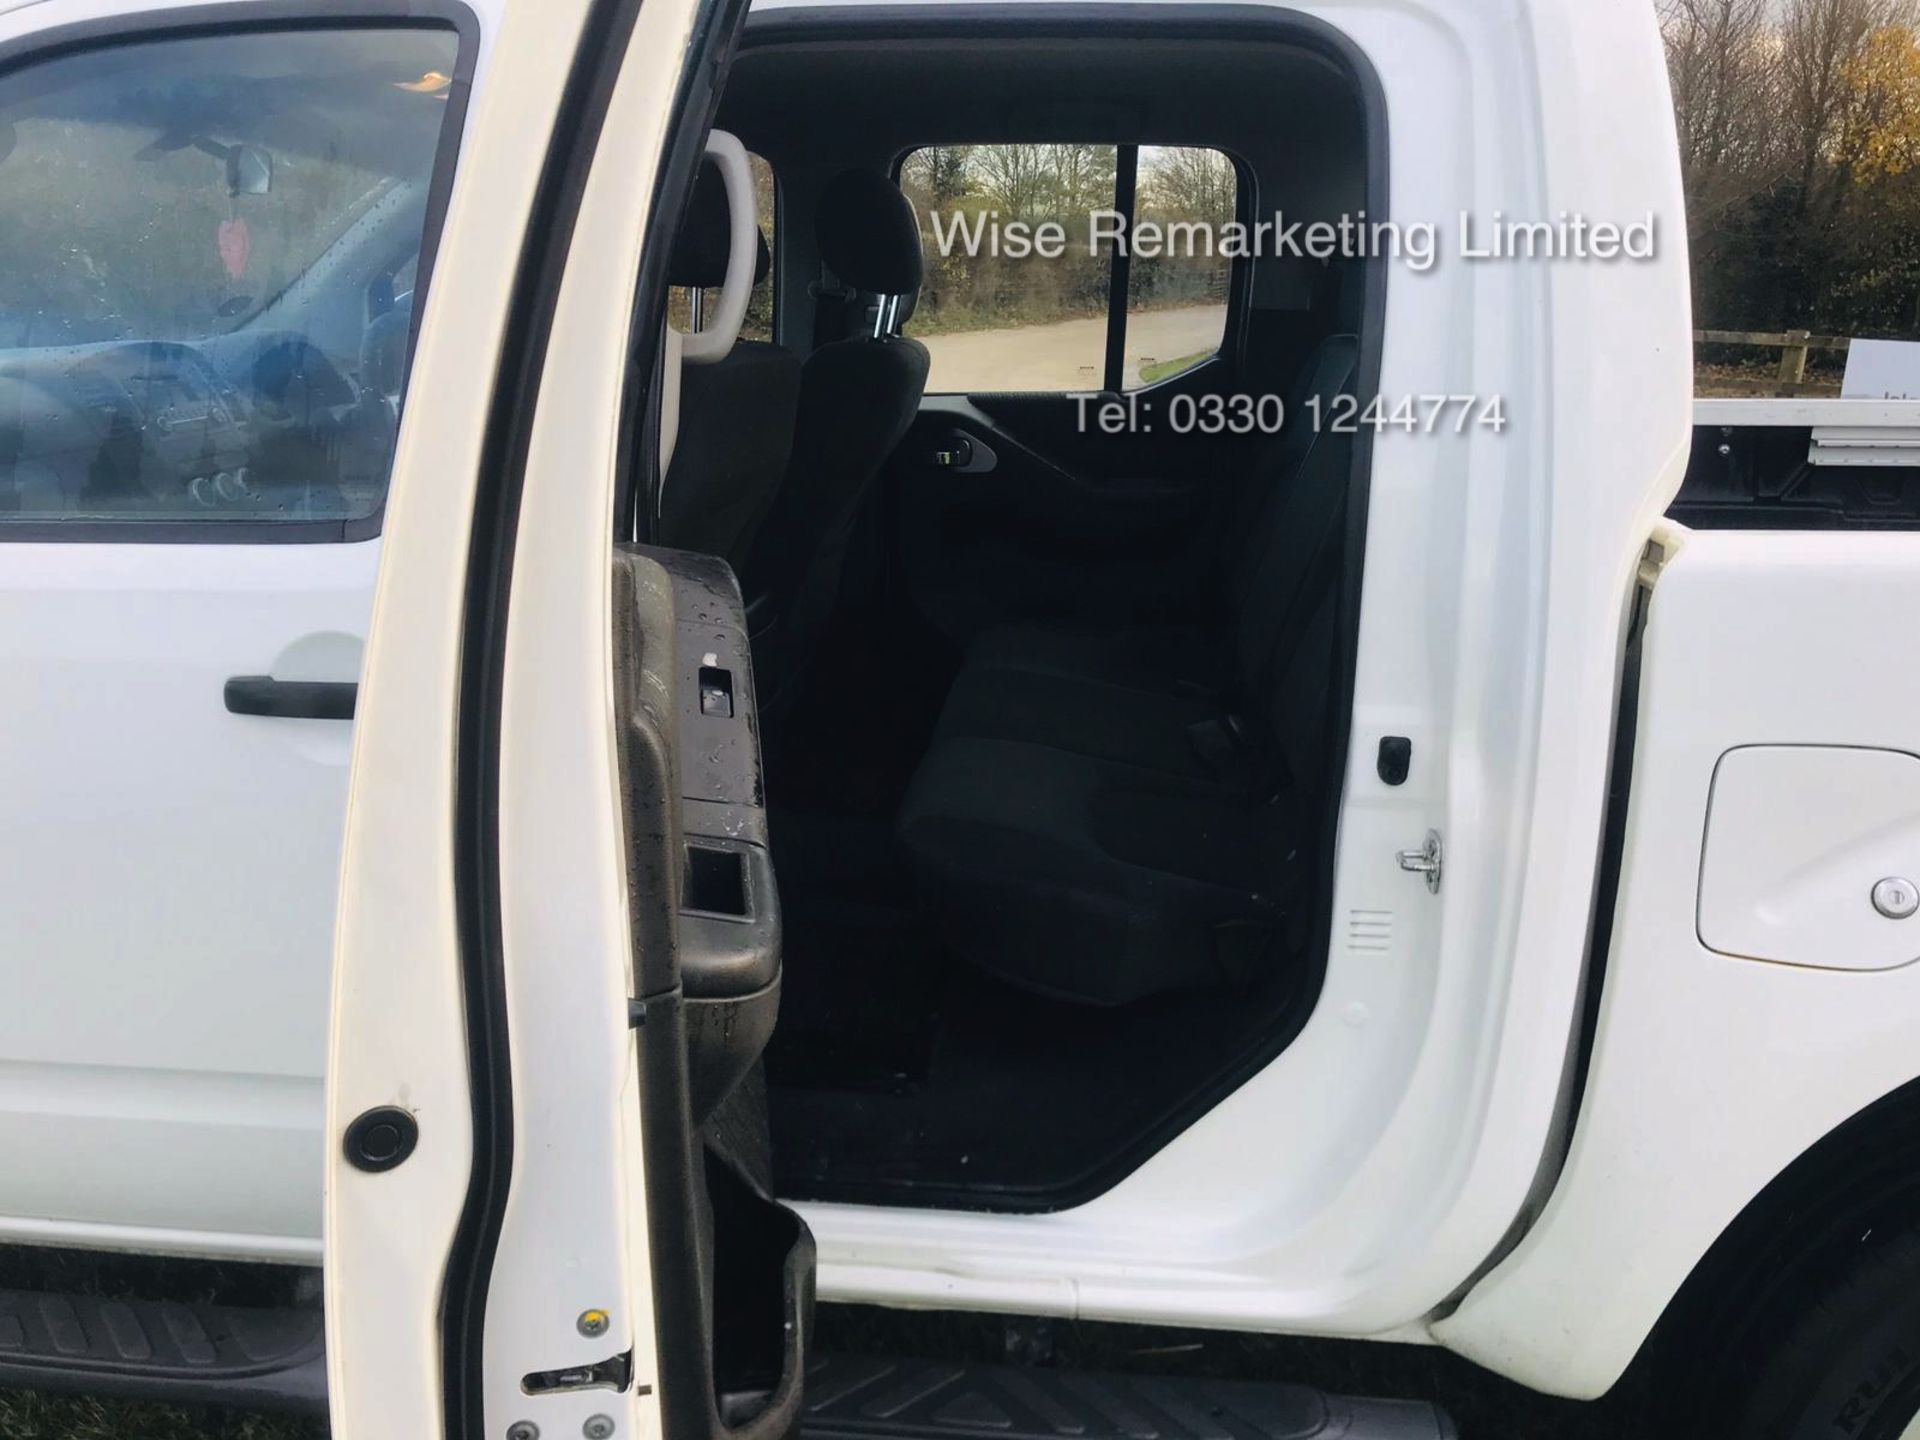 Nissan Navara Acentra 2.5 DCI - 2012 Model - Diamond White - 1 Keeper From New - Tow Bar - Image 16 of 20